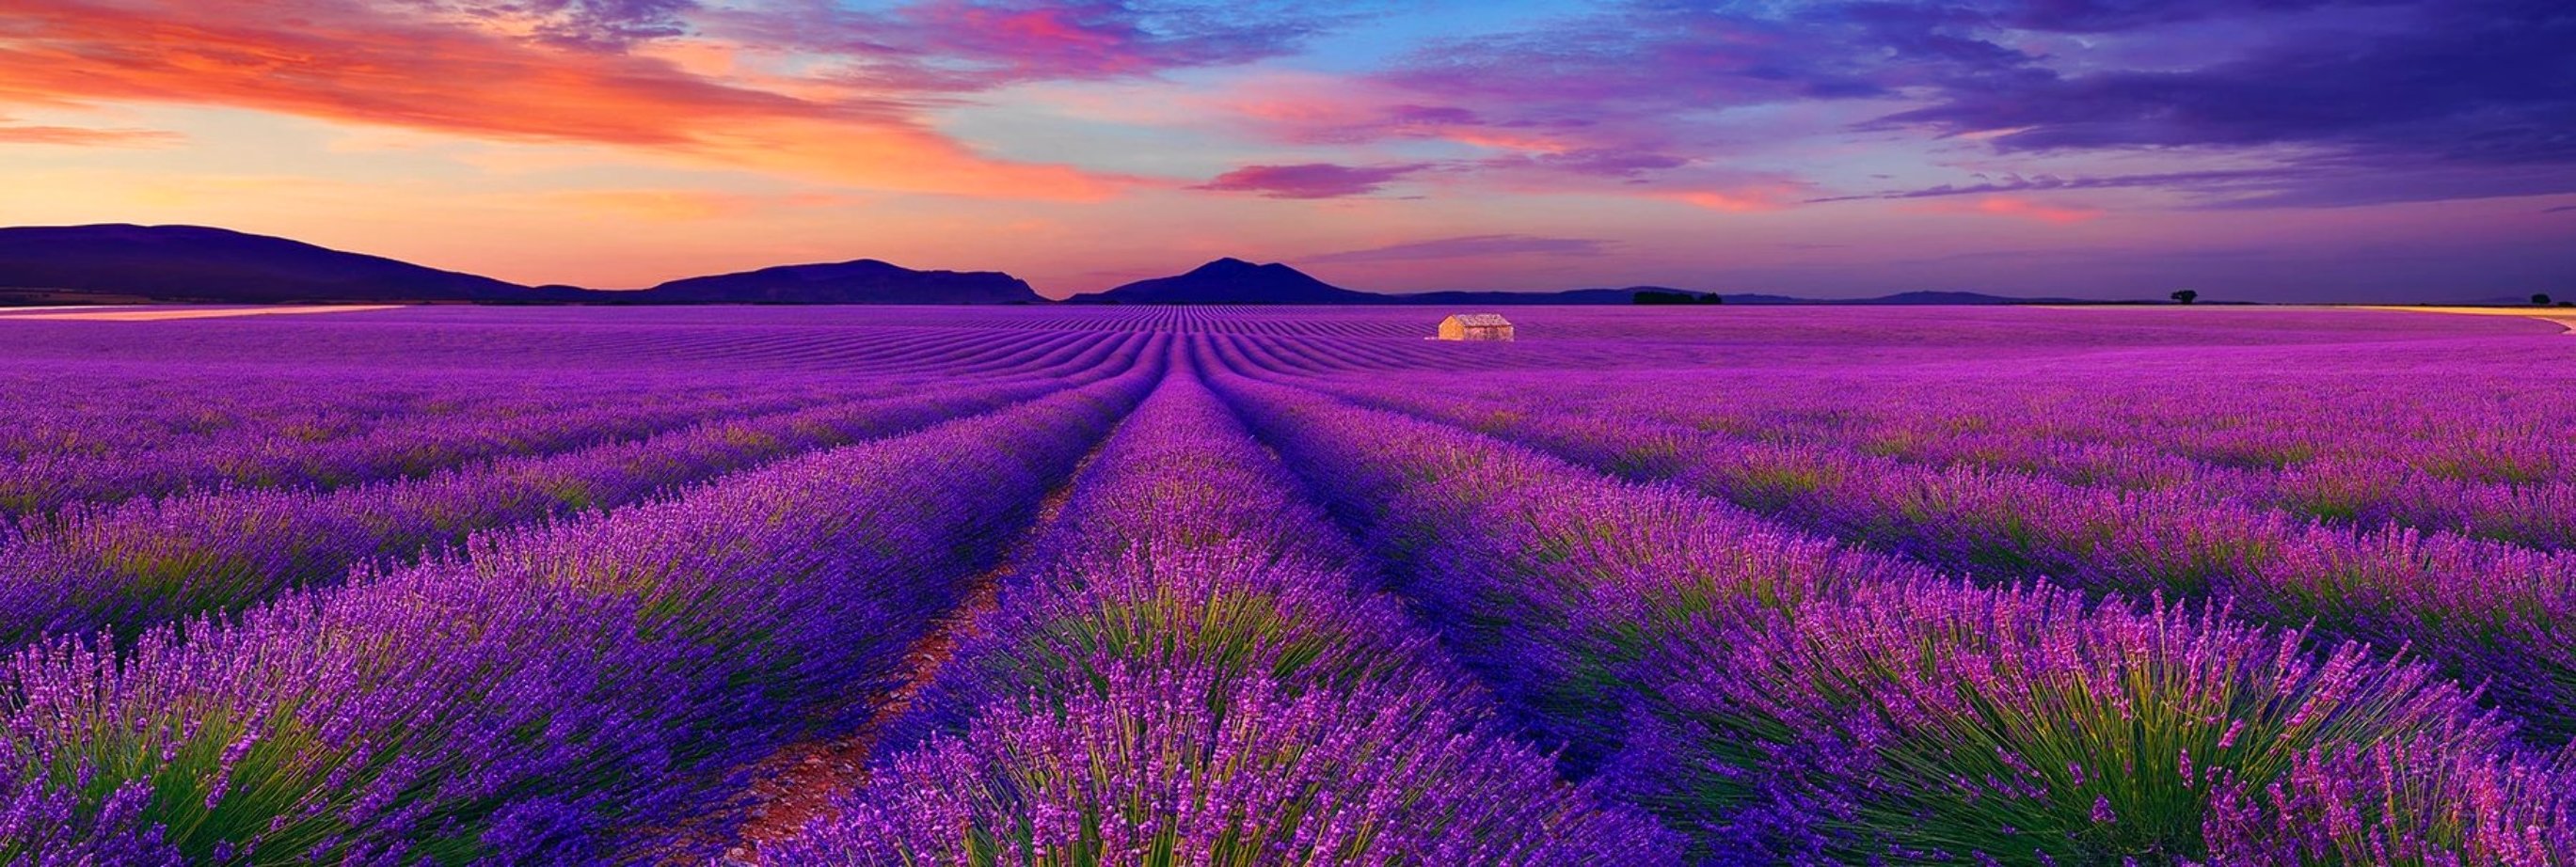 Le Reve (Valensole, France)   Panorama by Peter Lik